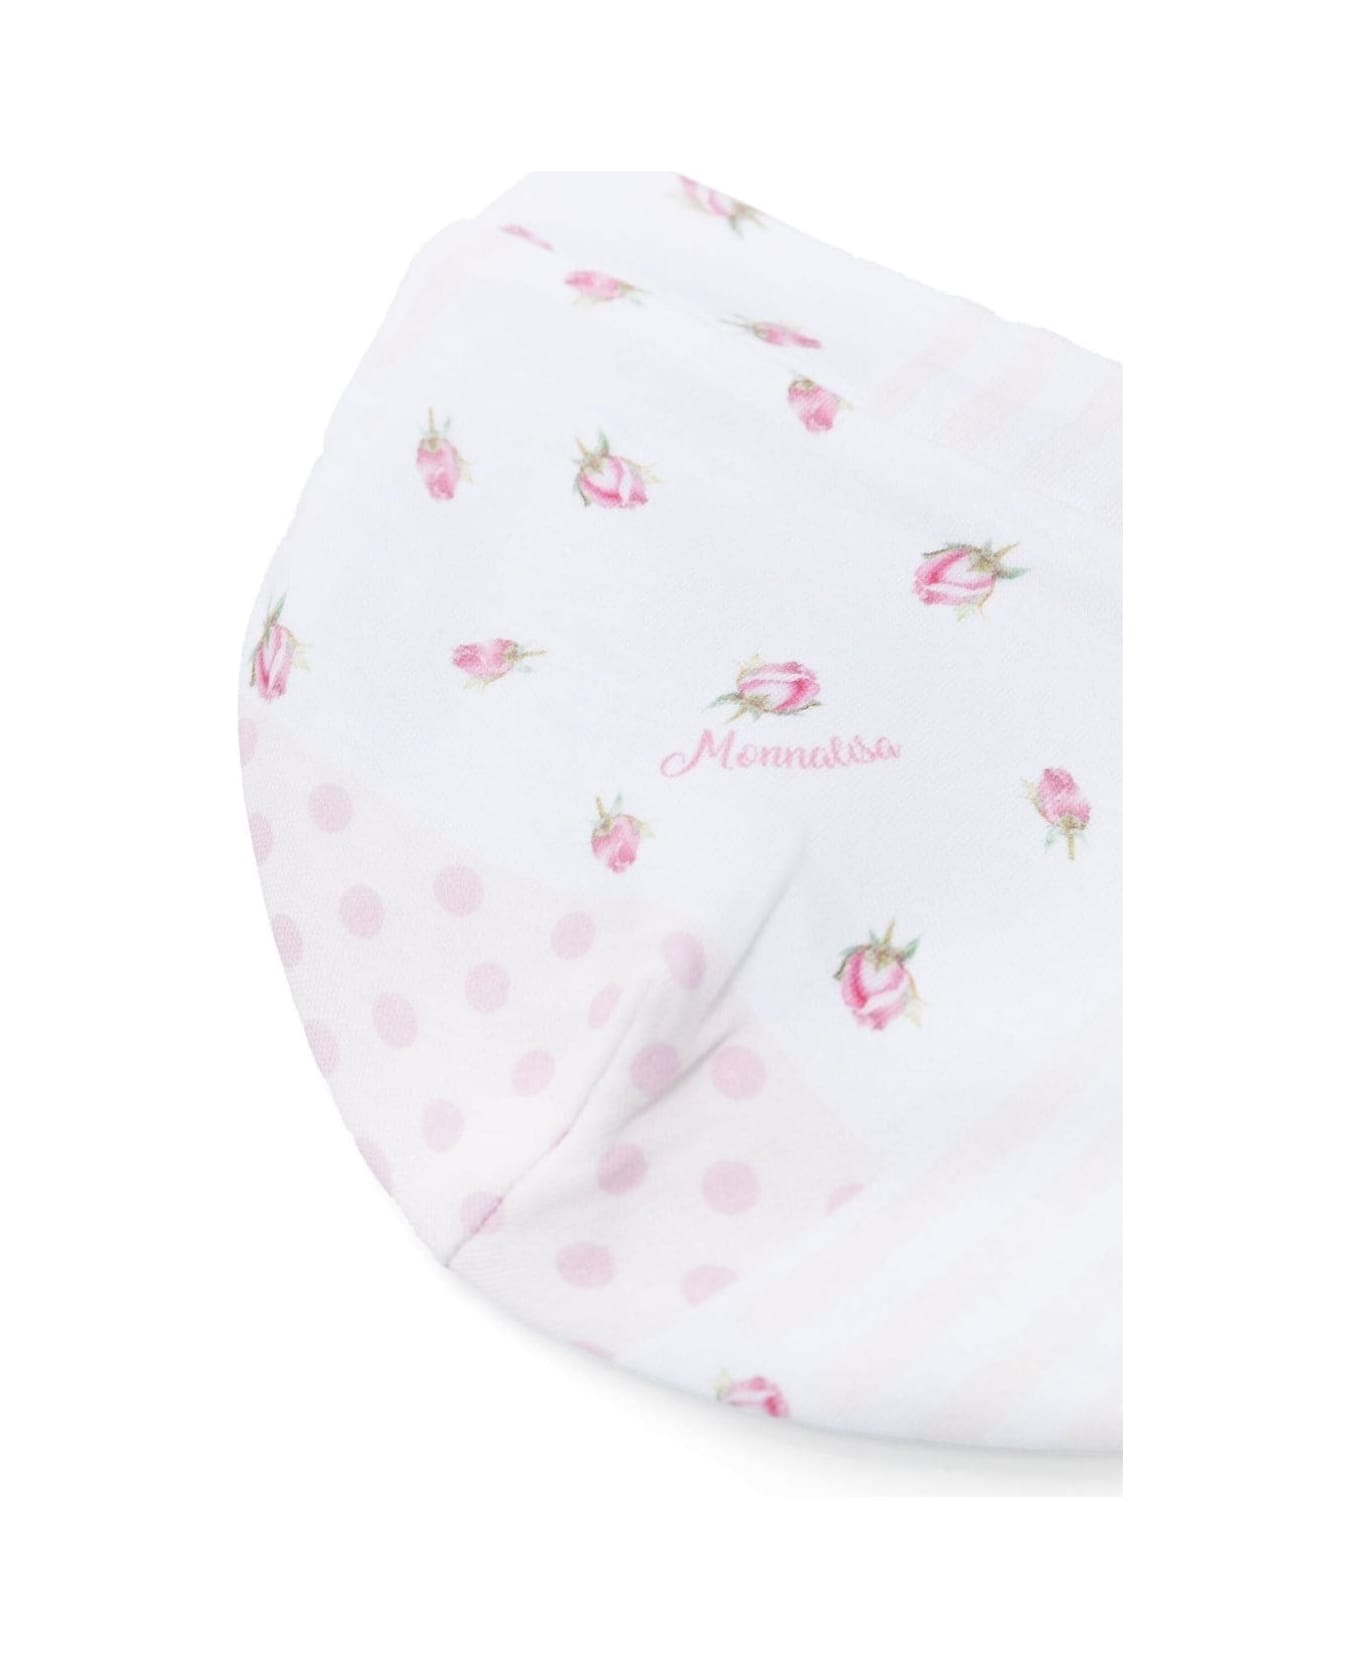 Monnalisa Pink And White Bonnet With Mixed Prints In Cotton Baby - White